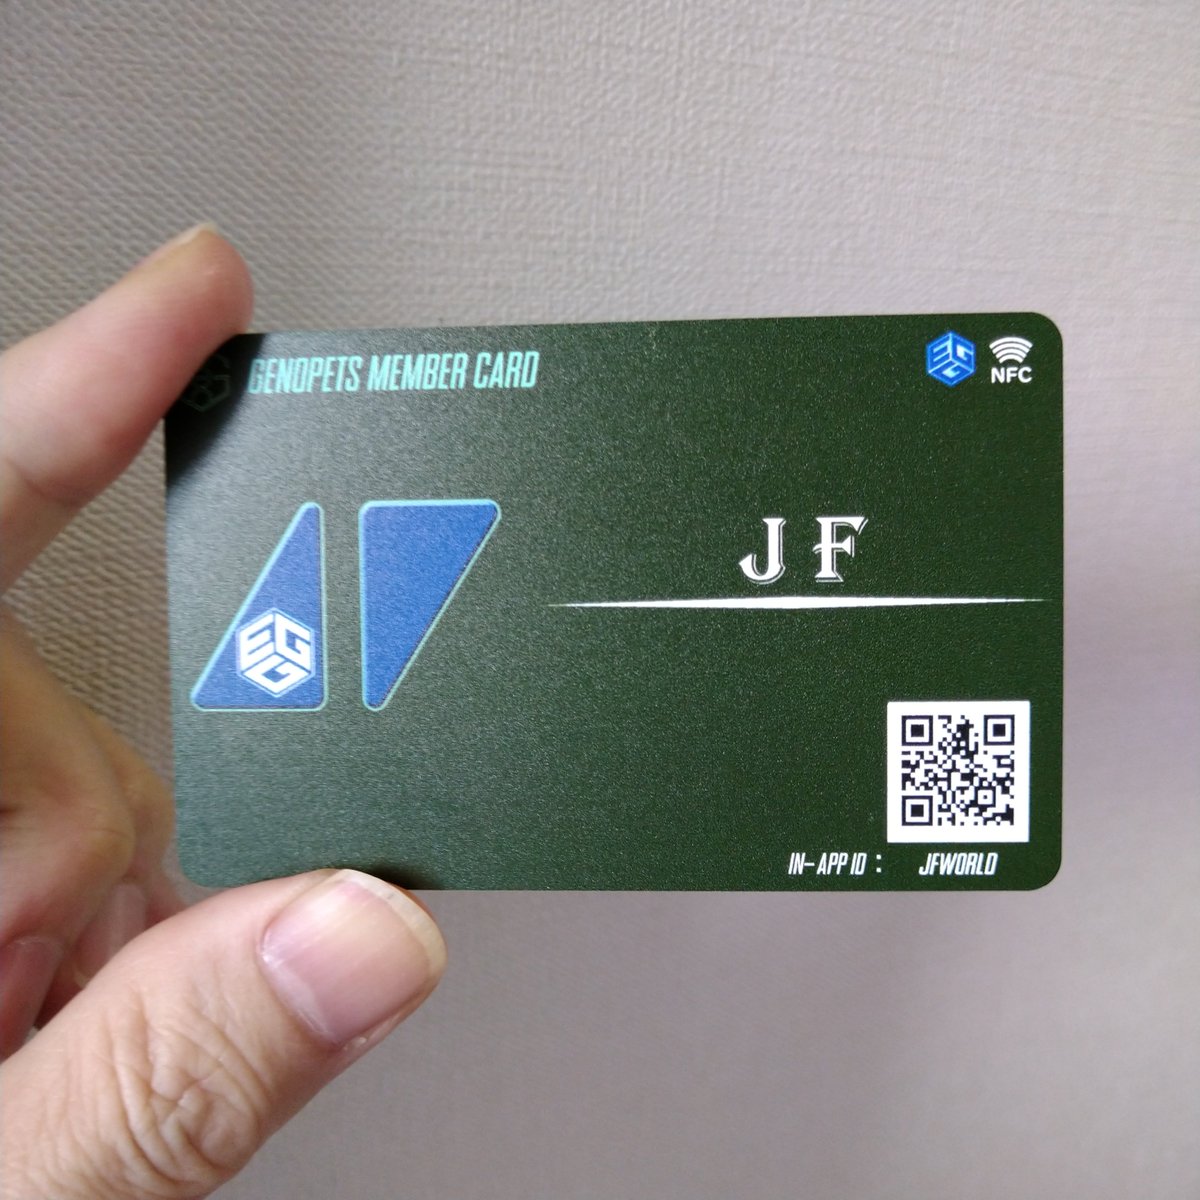 I got my #Genopets membership card thanks to @EruminaOfficial ! Love it ❤️ You can check my profile just by holding your phone over it through NFC🤳